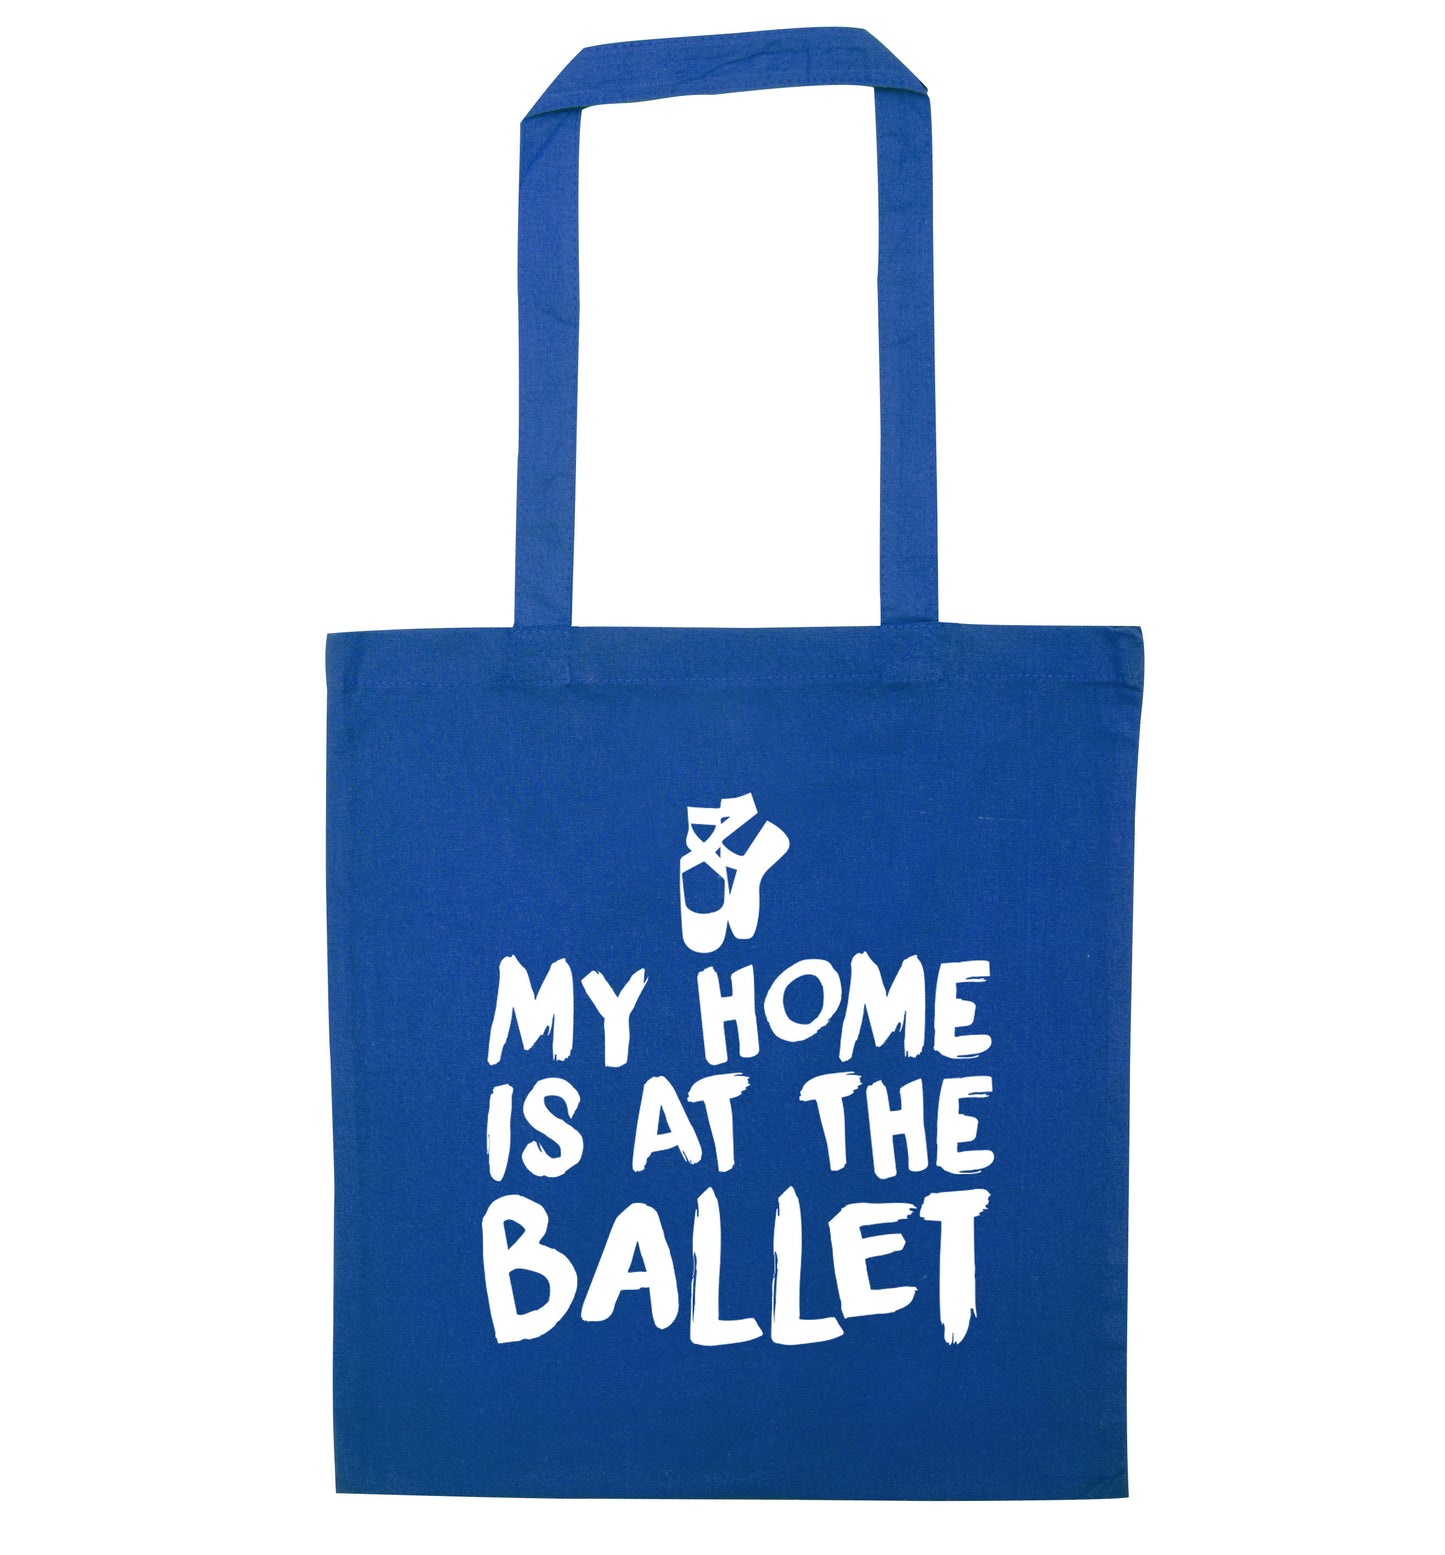 My home is at the ballet blue tote bag